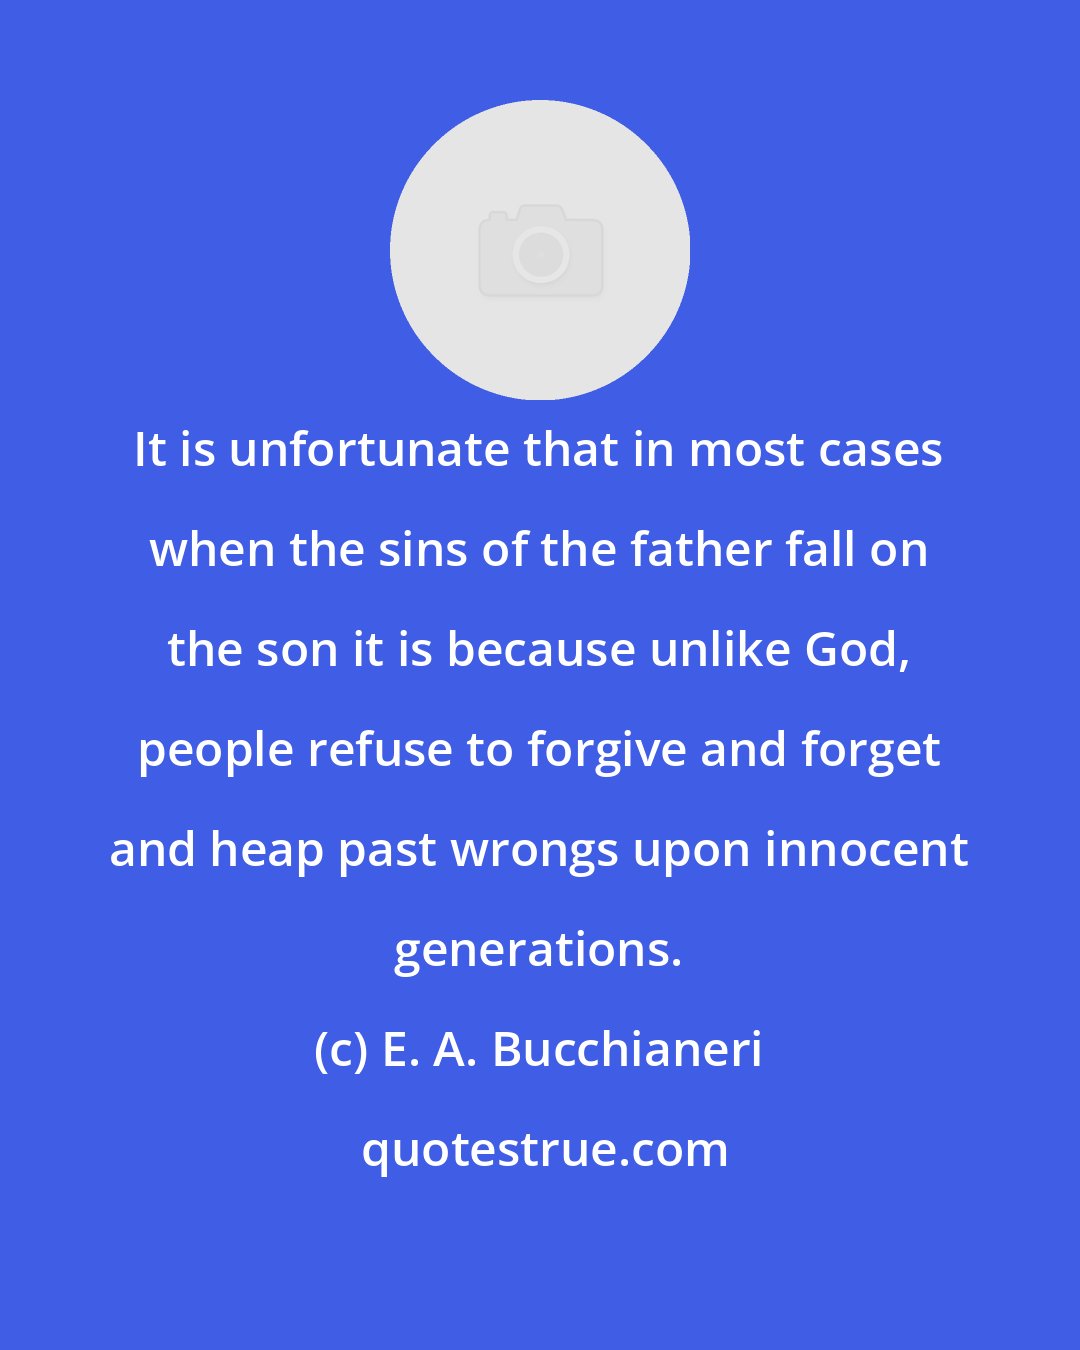 E. A. Bucchianeri: It is unfortunate that in most cases when the sins of the father fall on the son it is because unlike God, people refuse to forgive and forget and heap past wrongs upon innocent generations.